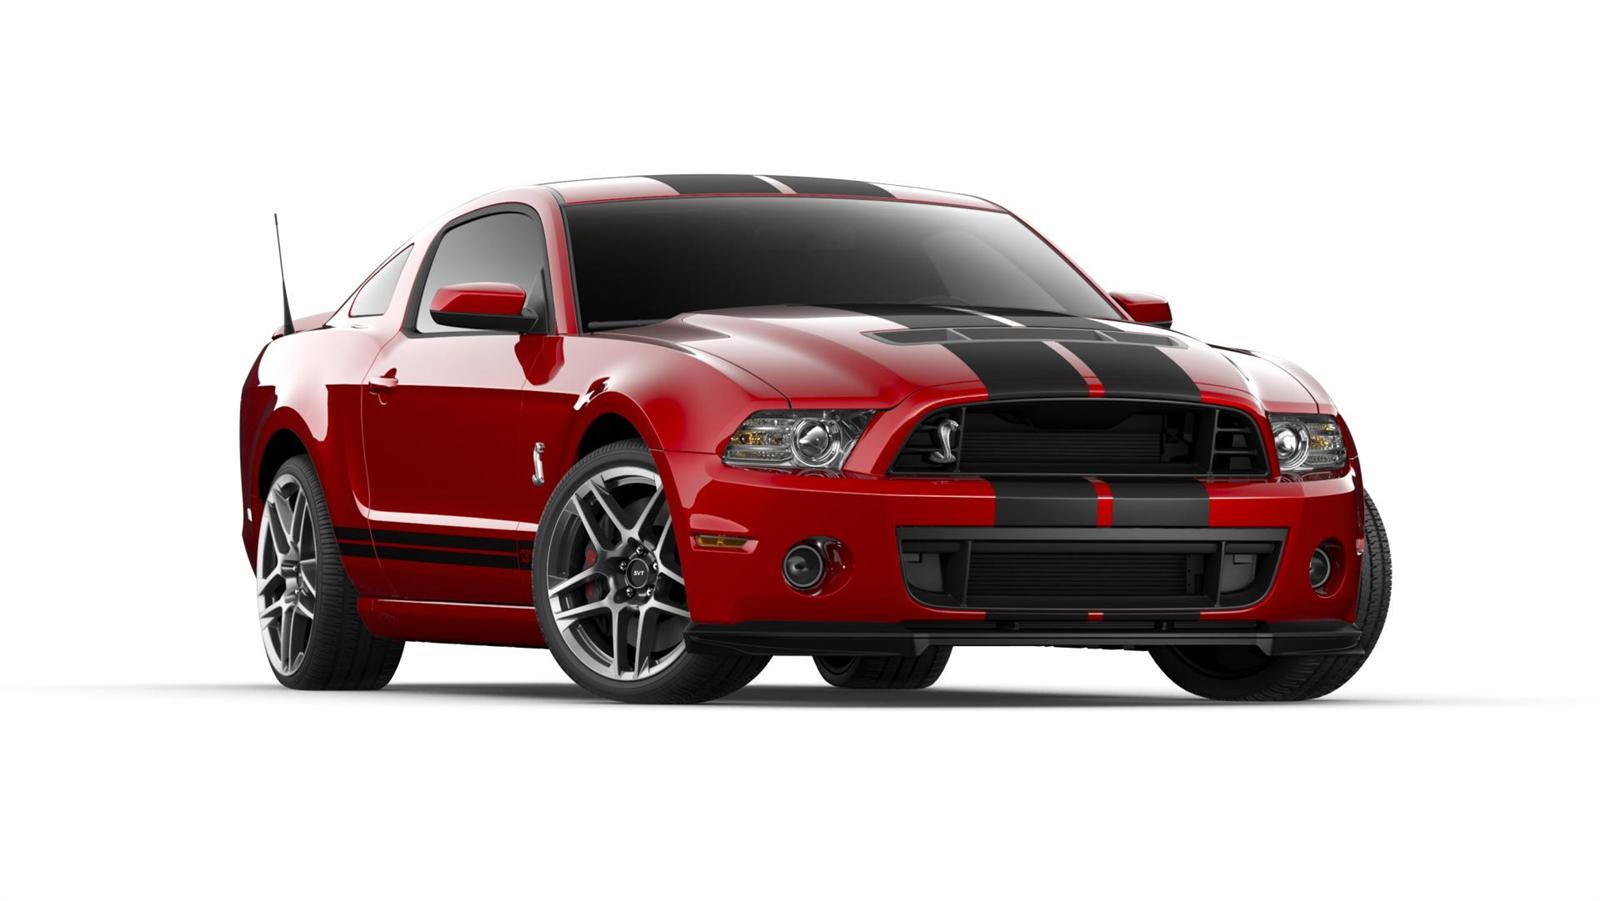 2014 Shelby Mustang GT500